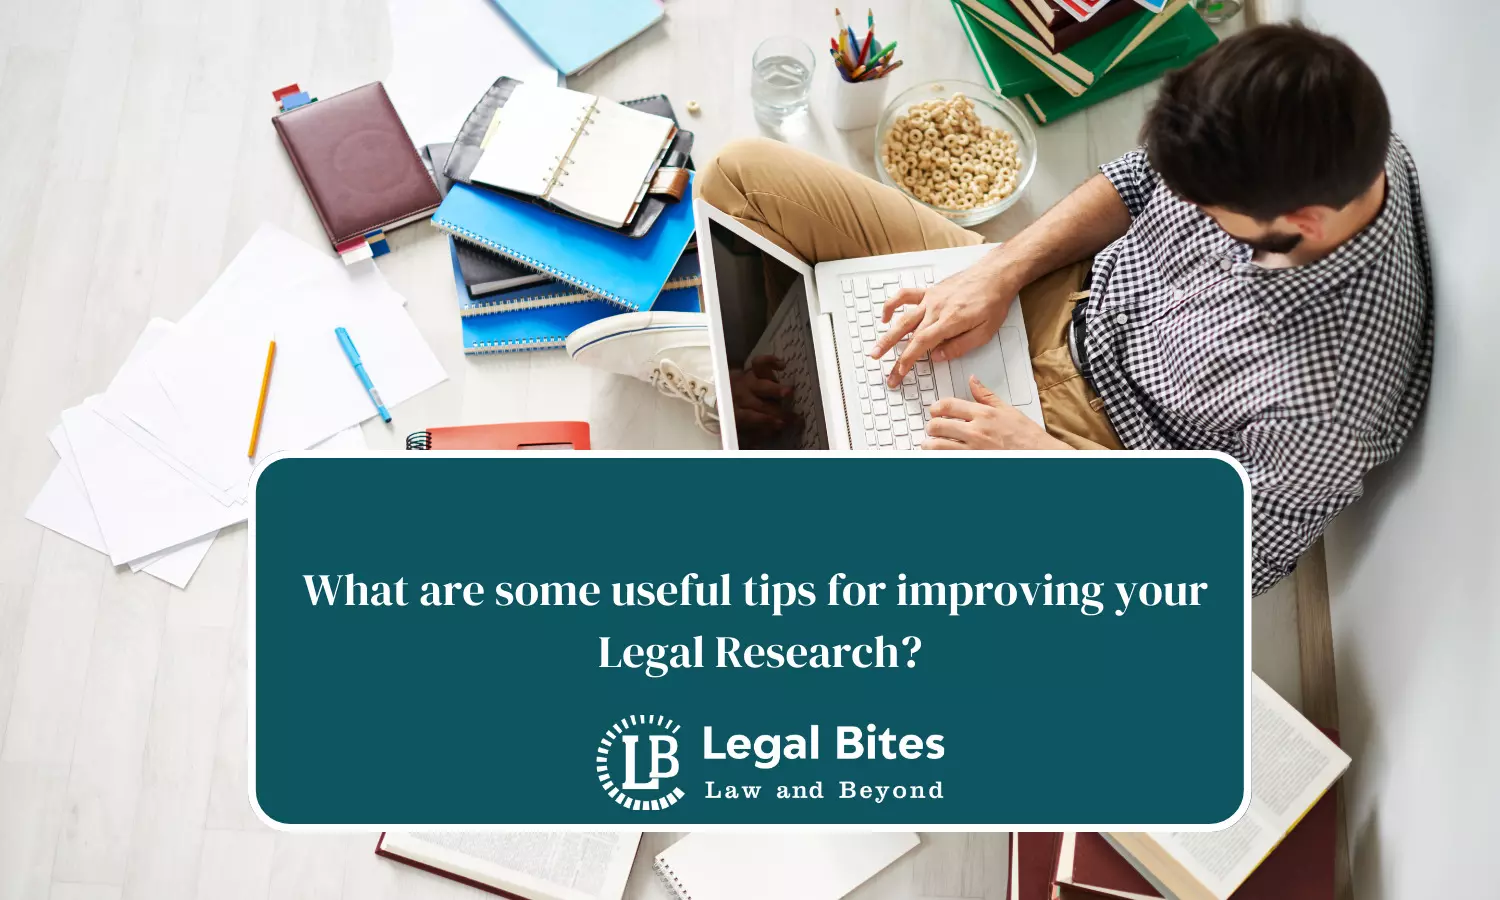 What are some useful tips for improving your legal research?